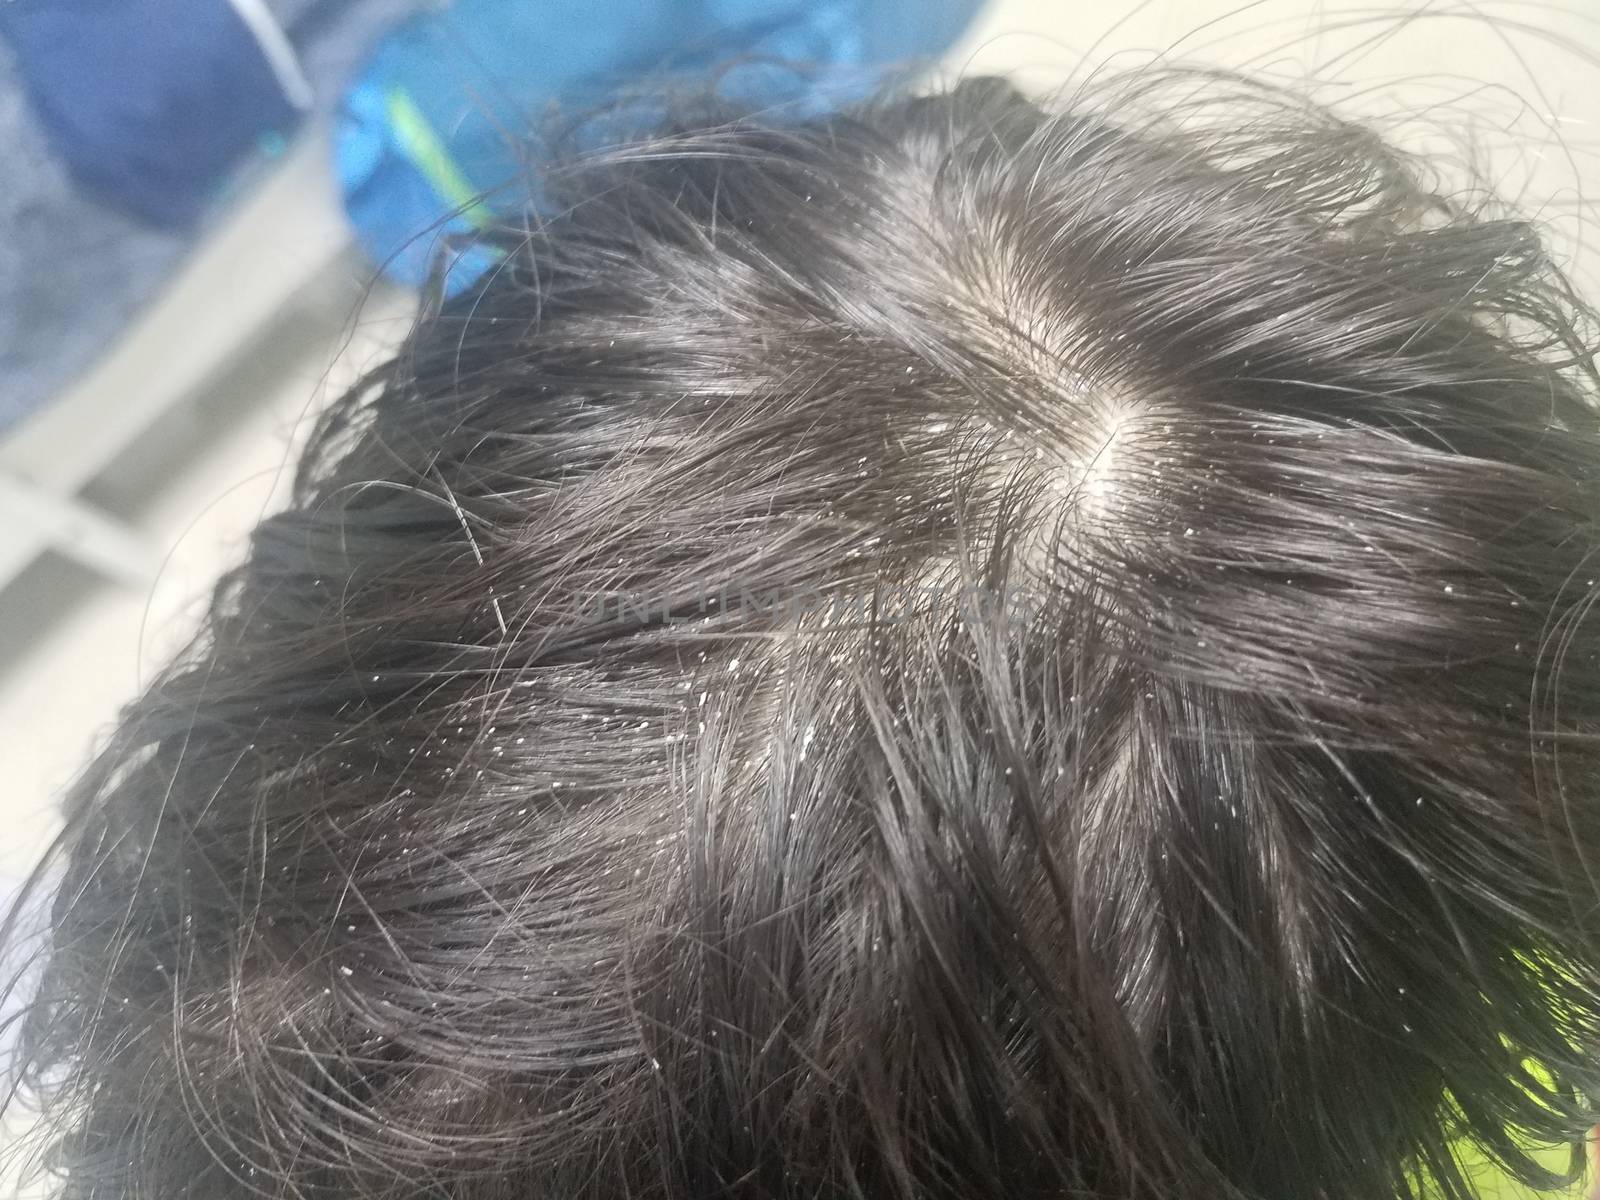 child brown hair with white lice insects or dandruff